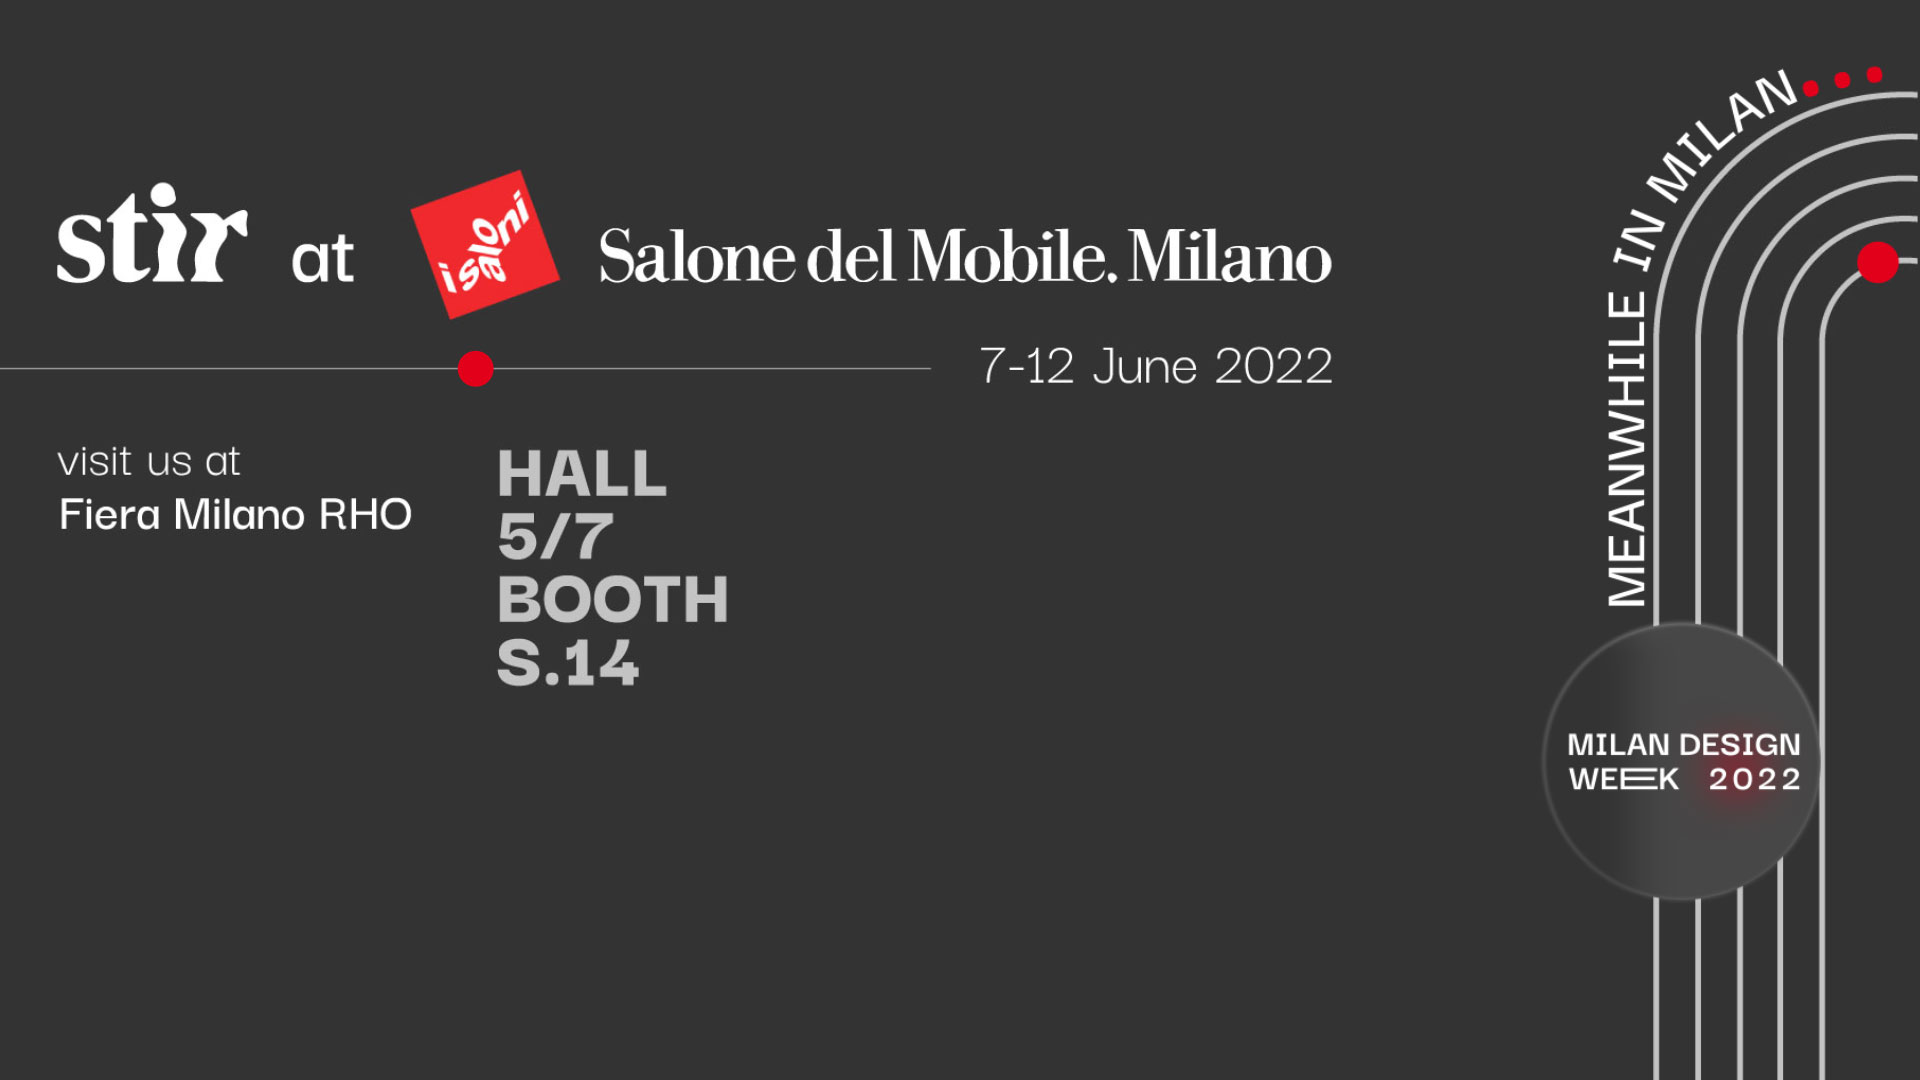 Salone del Mobile 2022: What to see this Milan Design Week